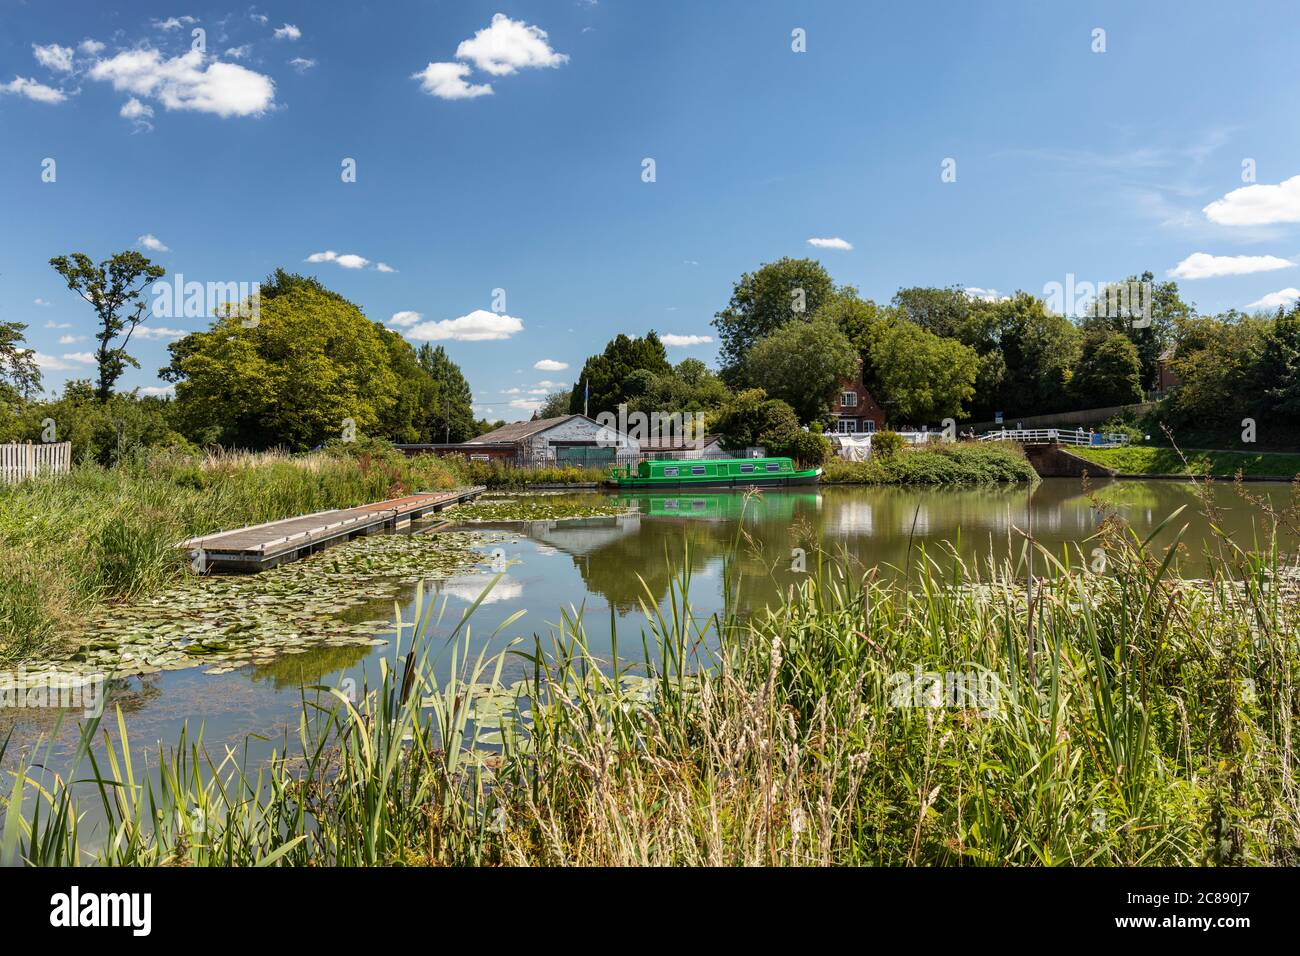 A green canal boat in the side pond at Lock 44 and Caen Hill Cafe, Caen Hill Locks, Kennet and Avon Canal, Devizes, Wiltshire, England, UK Stock Photo